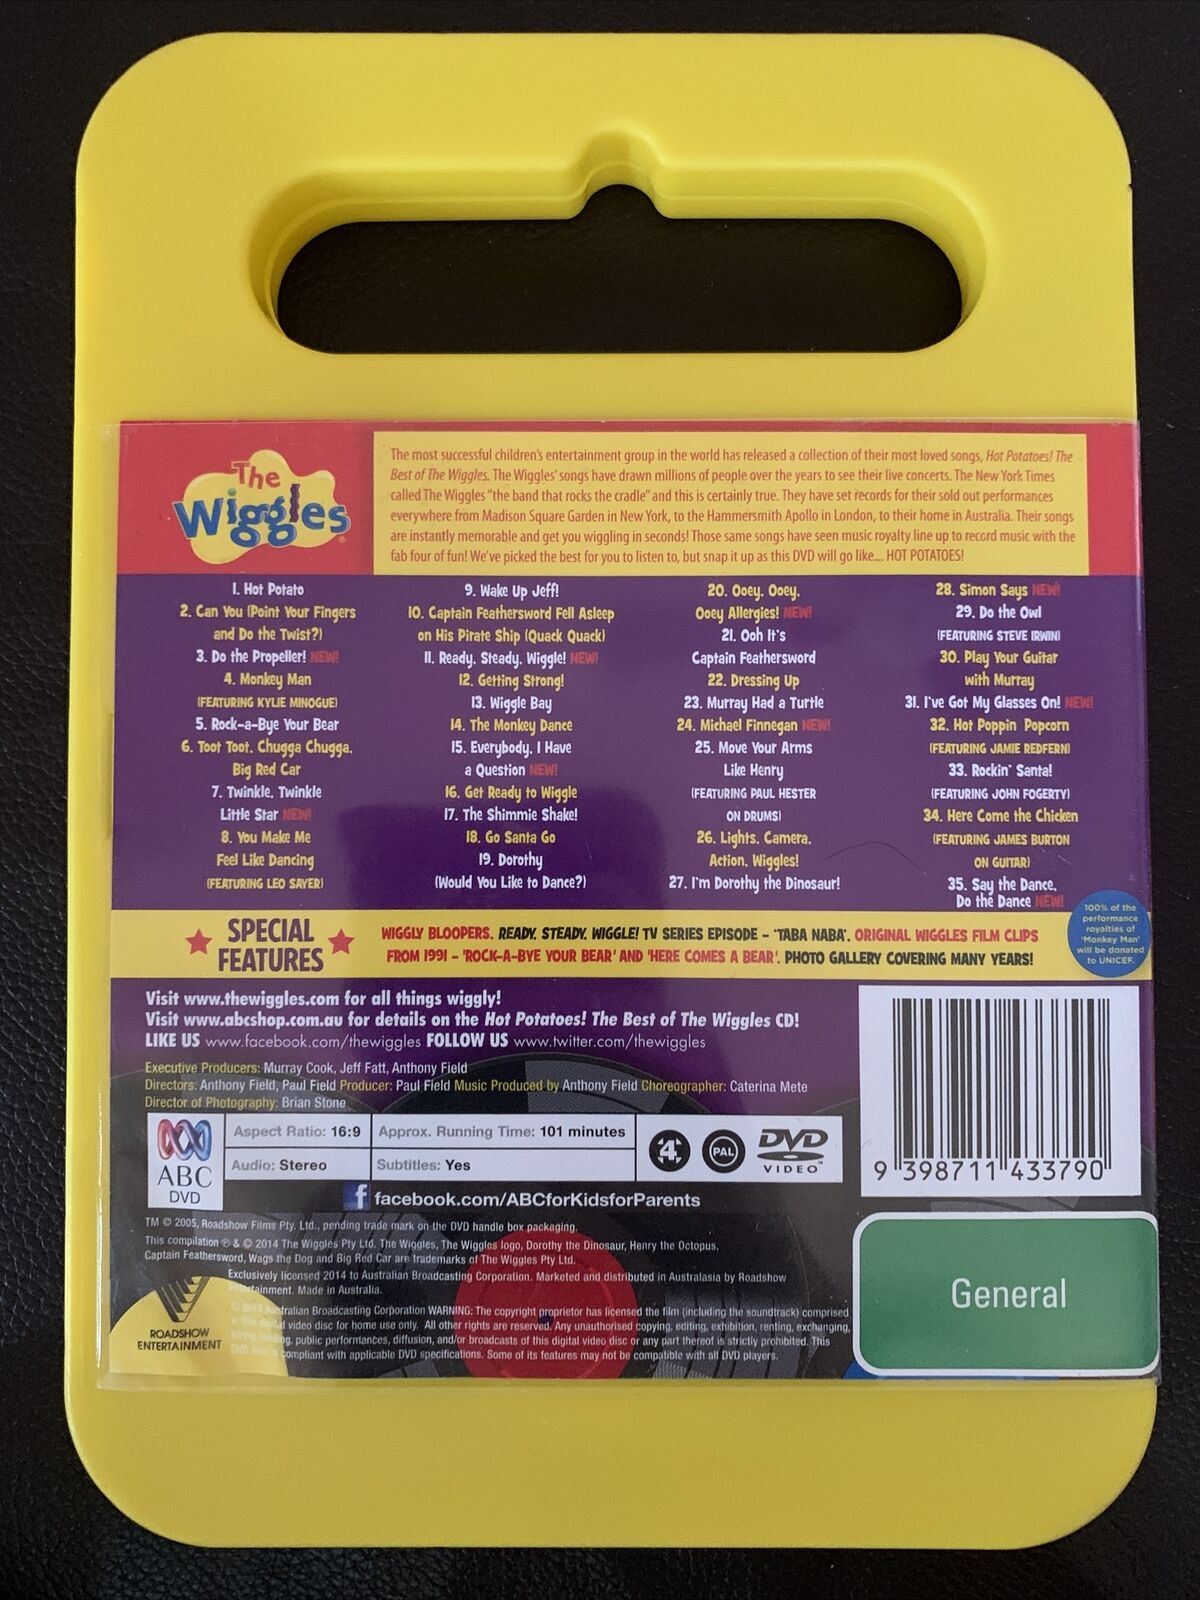 The Wiggles - Apples & Bananas + The Hot Potatoes! - Best Of The Wiggles (DVD)